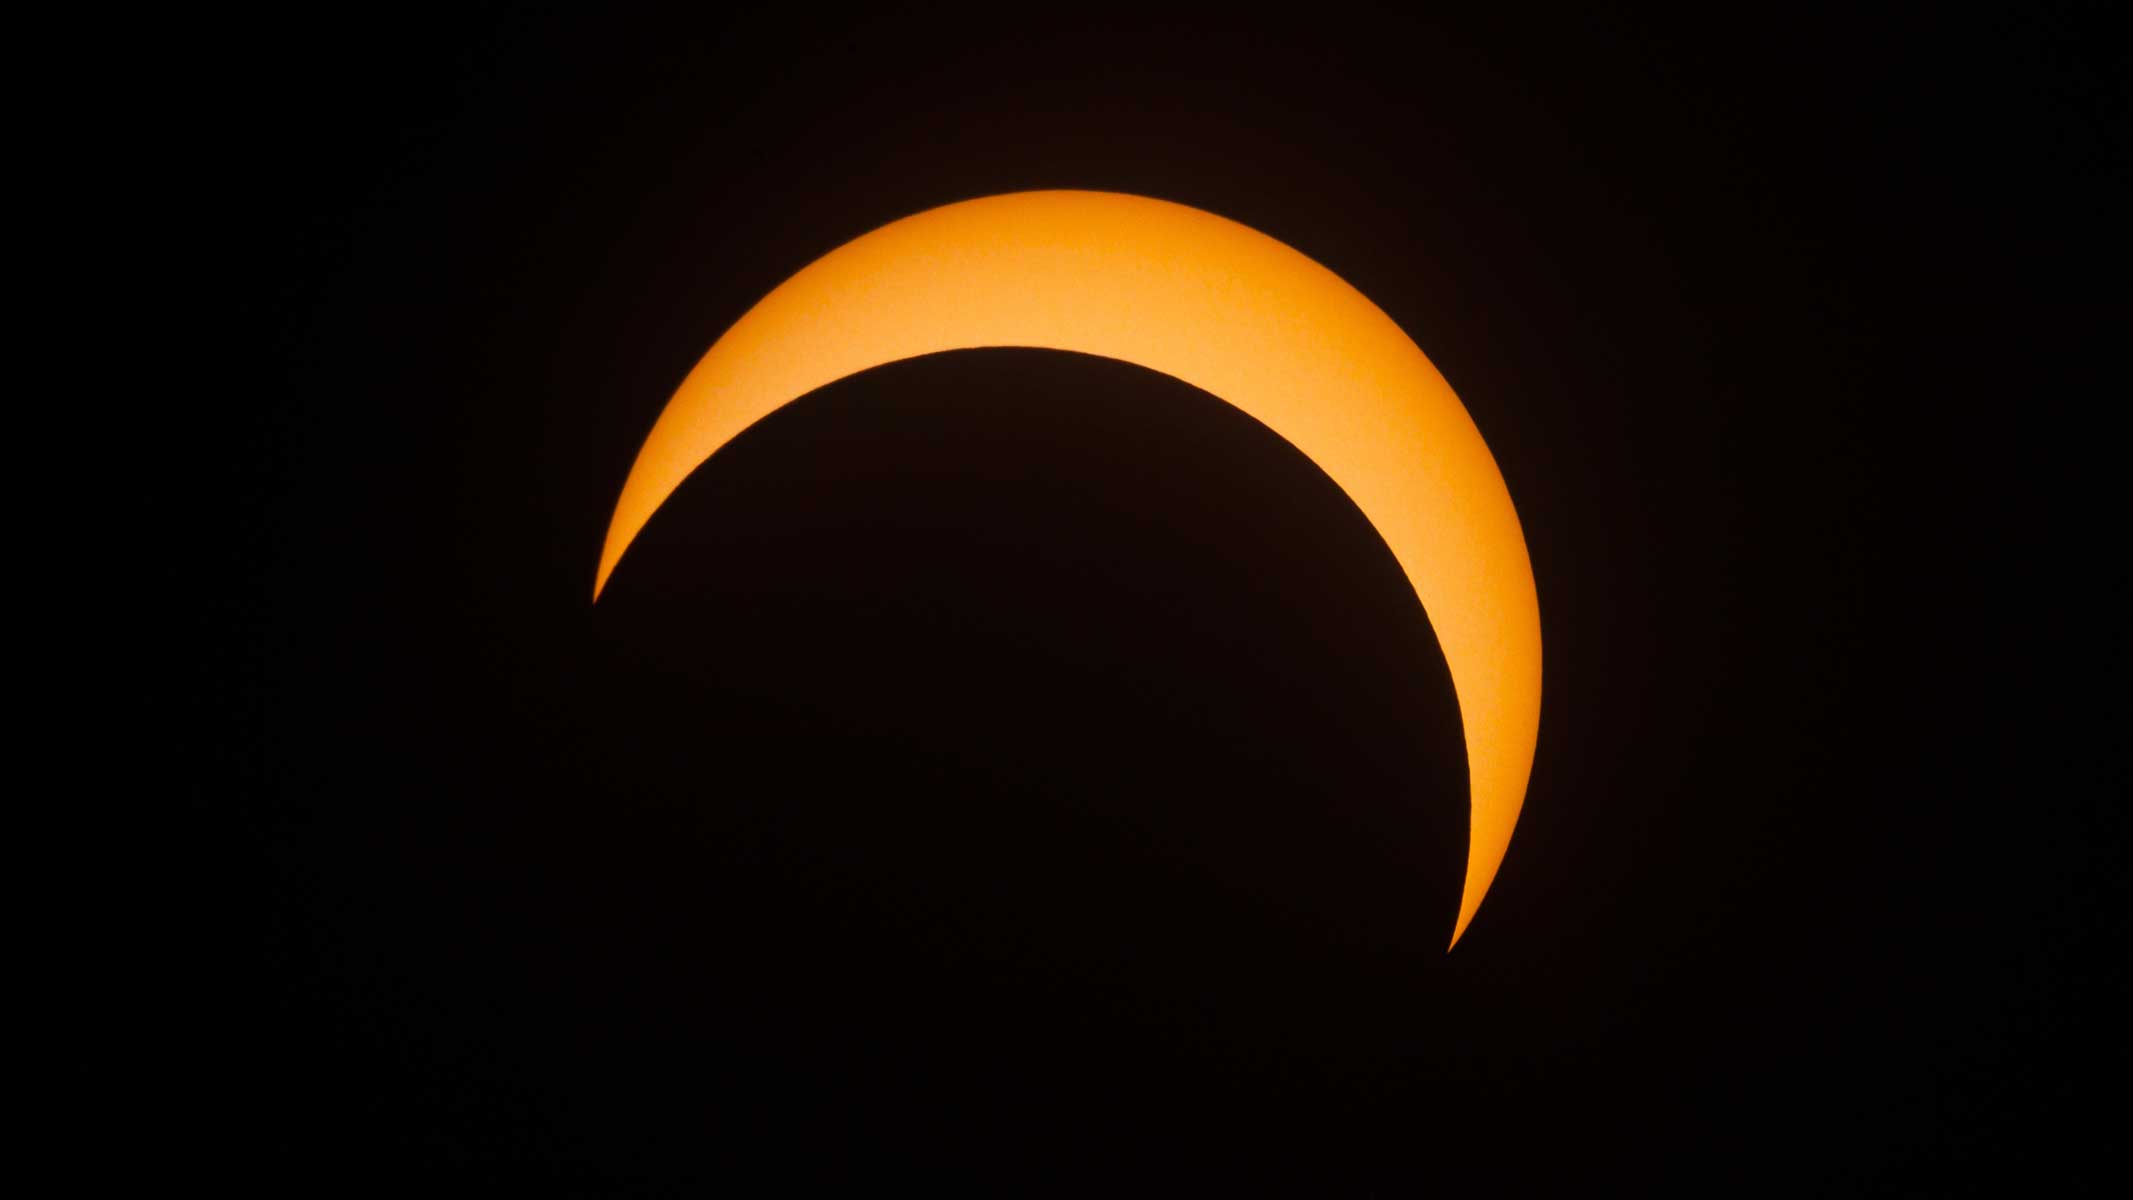 The first solar eclipse of 2022 occurs during a rare Black Moon on April 30, 2022.